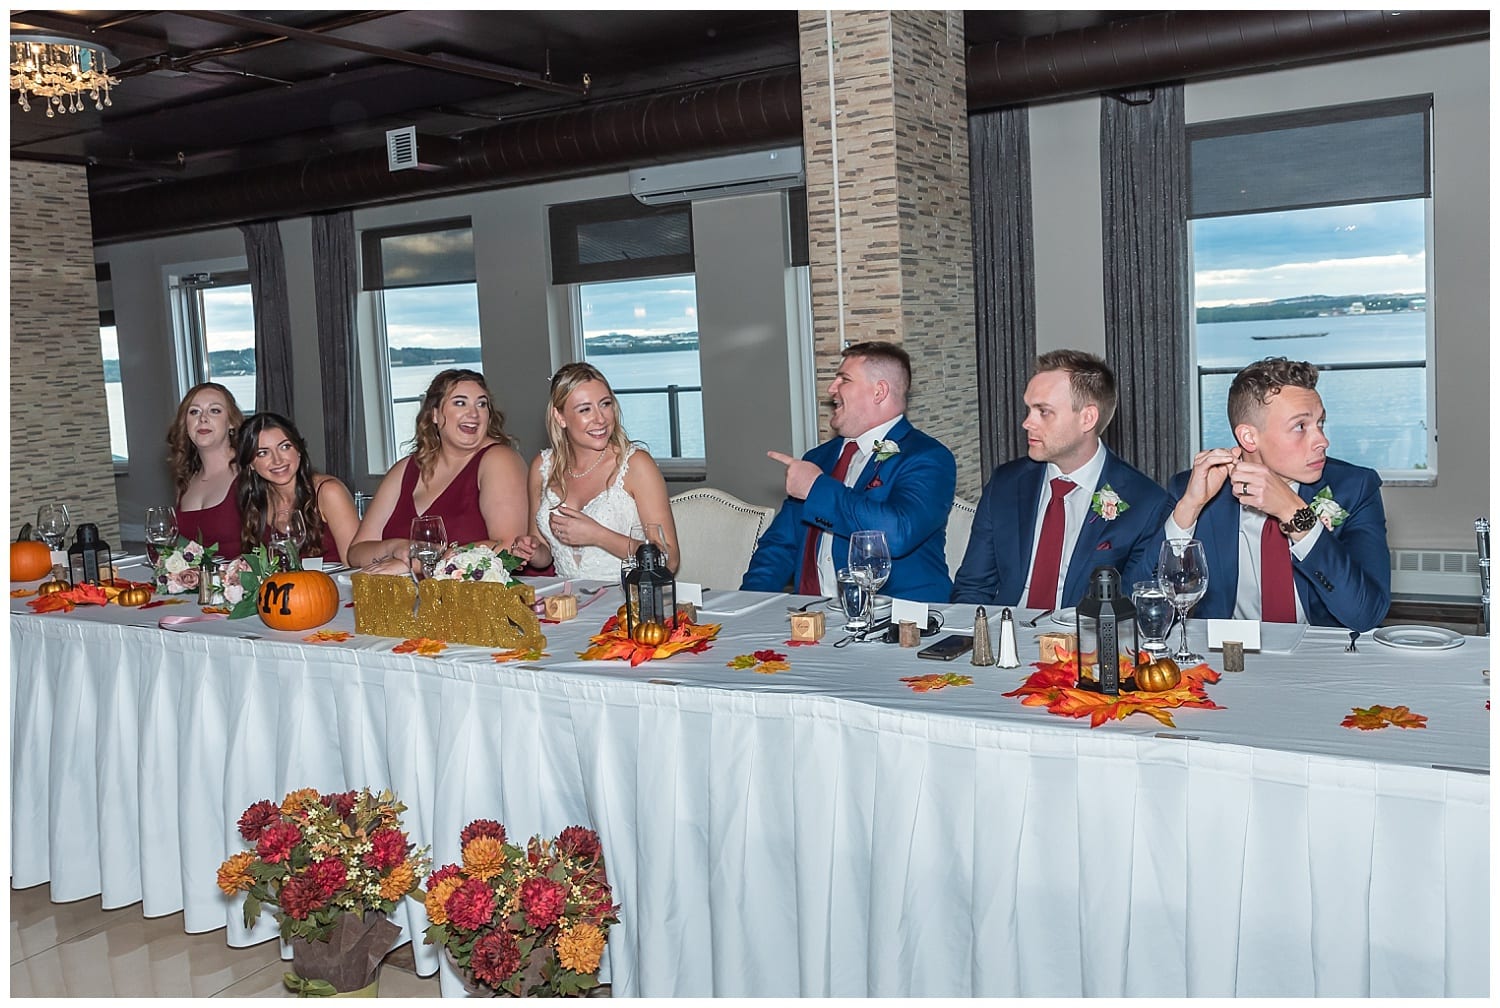 The head table with the bride, groom and wedding party during the wedding reception at Bedford Basin Farmer's Market in Halifax, NS.